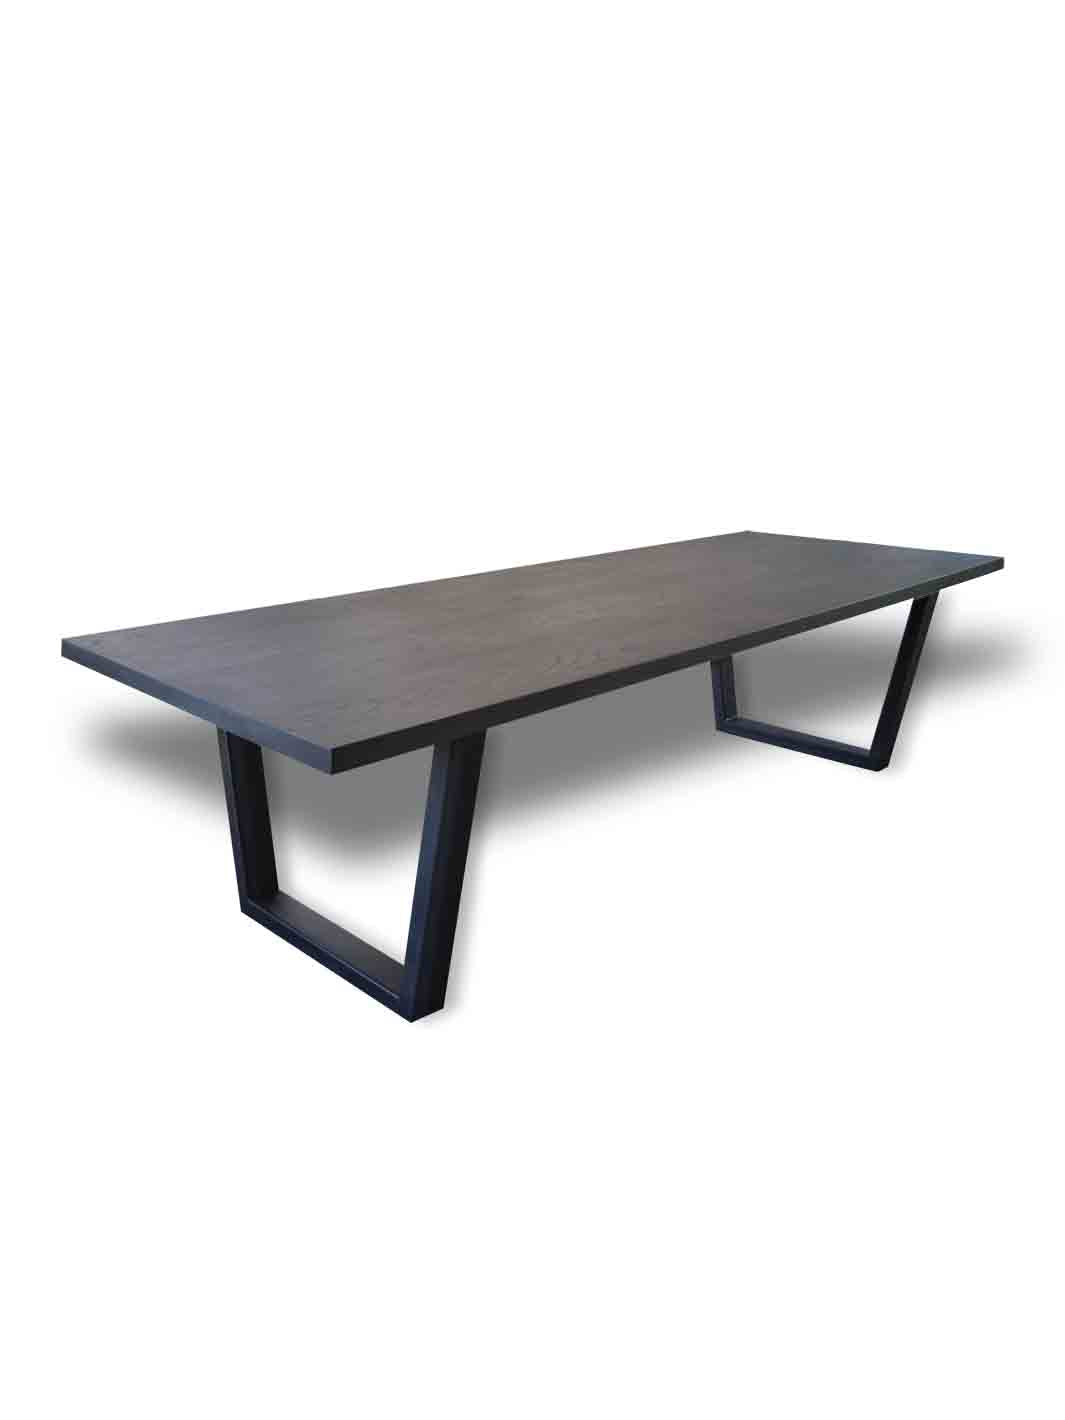 Modern Farmhouse Dining Table with Black Steel Tapered Legs Earthly Comfort Dining Tables 652